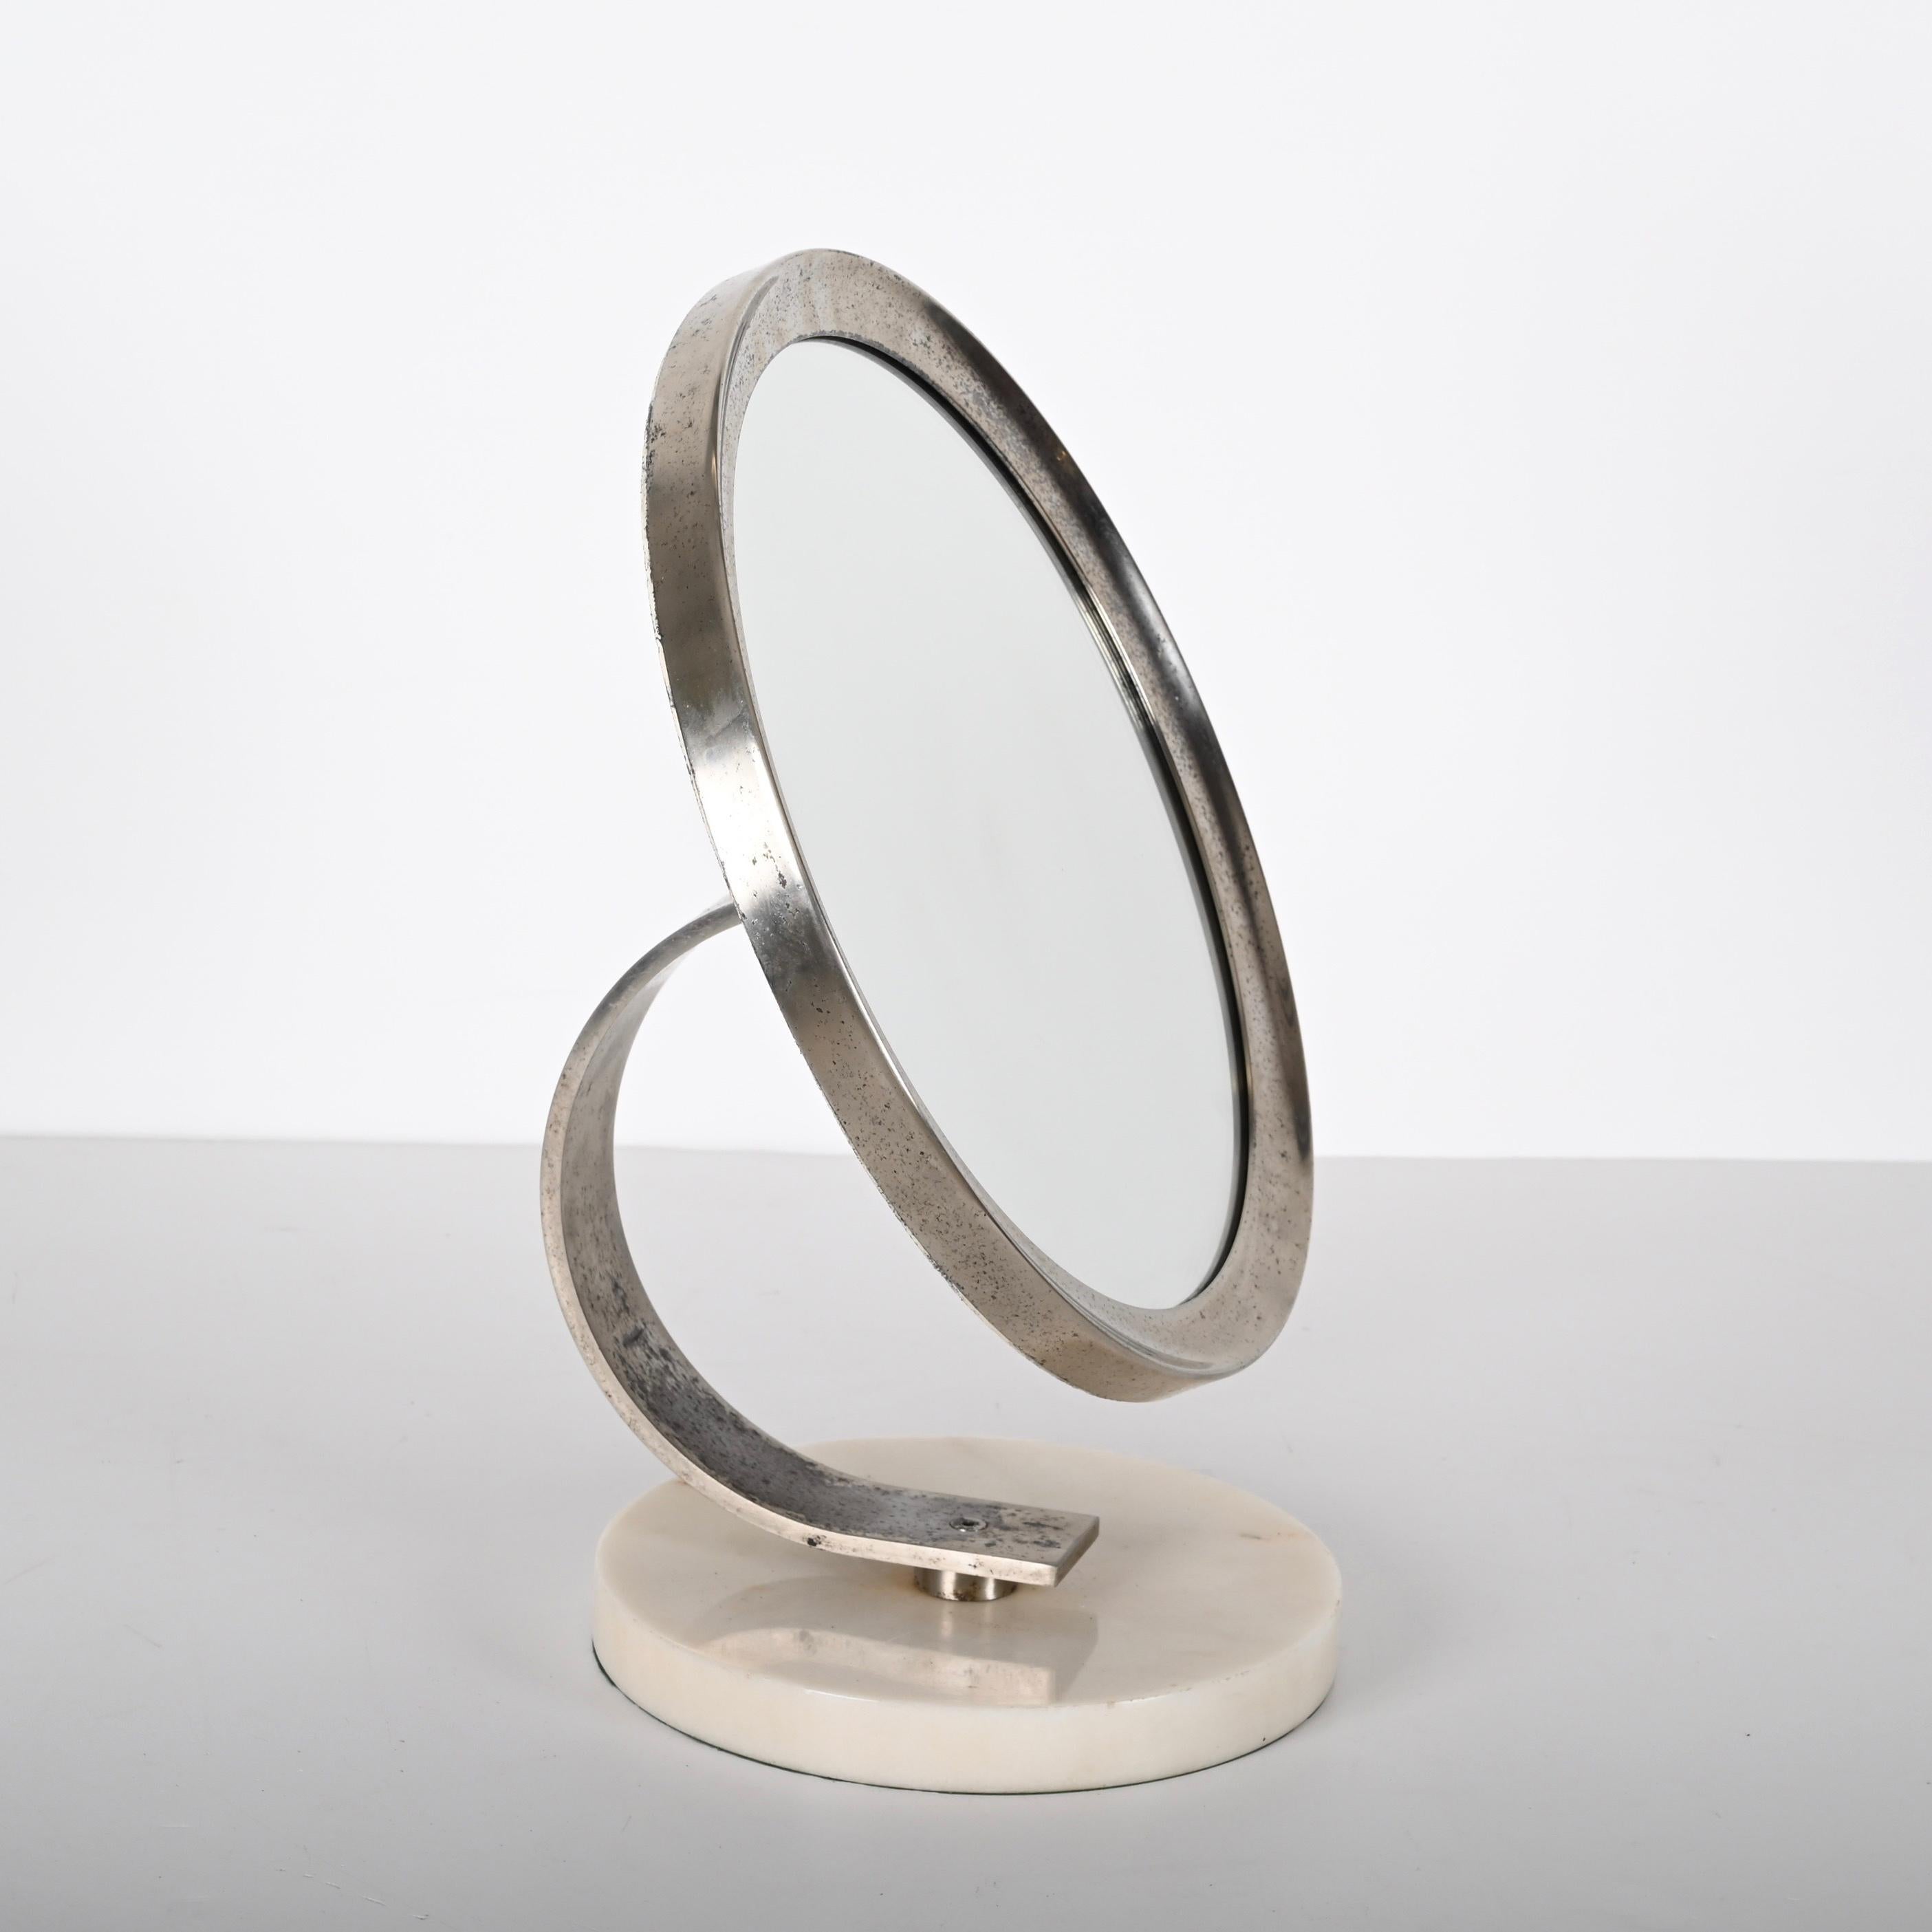 Incredible mid-century white Carrara marble and steel round dressing table mirror. This fantastic item was designed in Italy during the 1960s.

It is a beautiful dressing table mirror with a circular base in solid white Carrara marble and comes